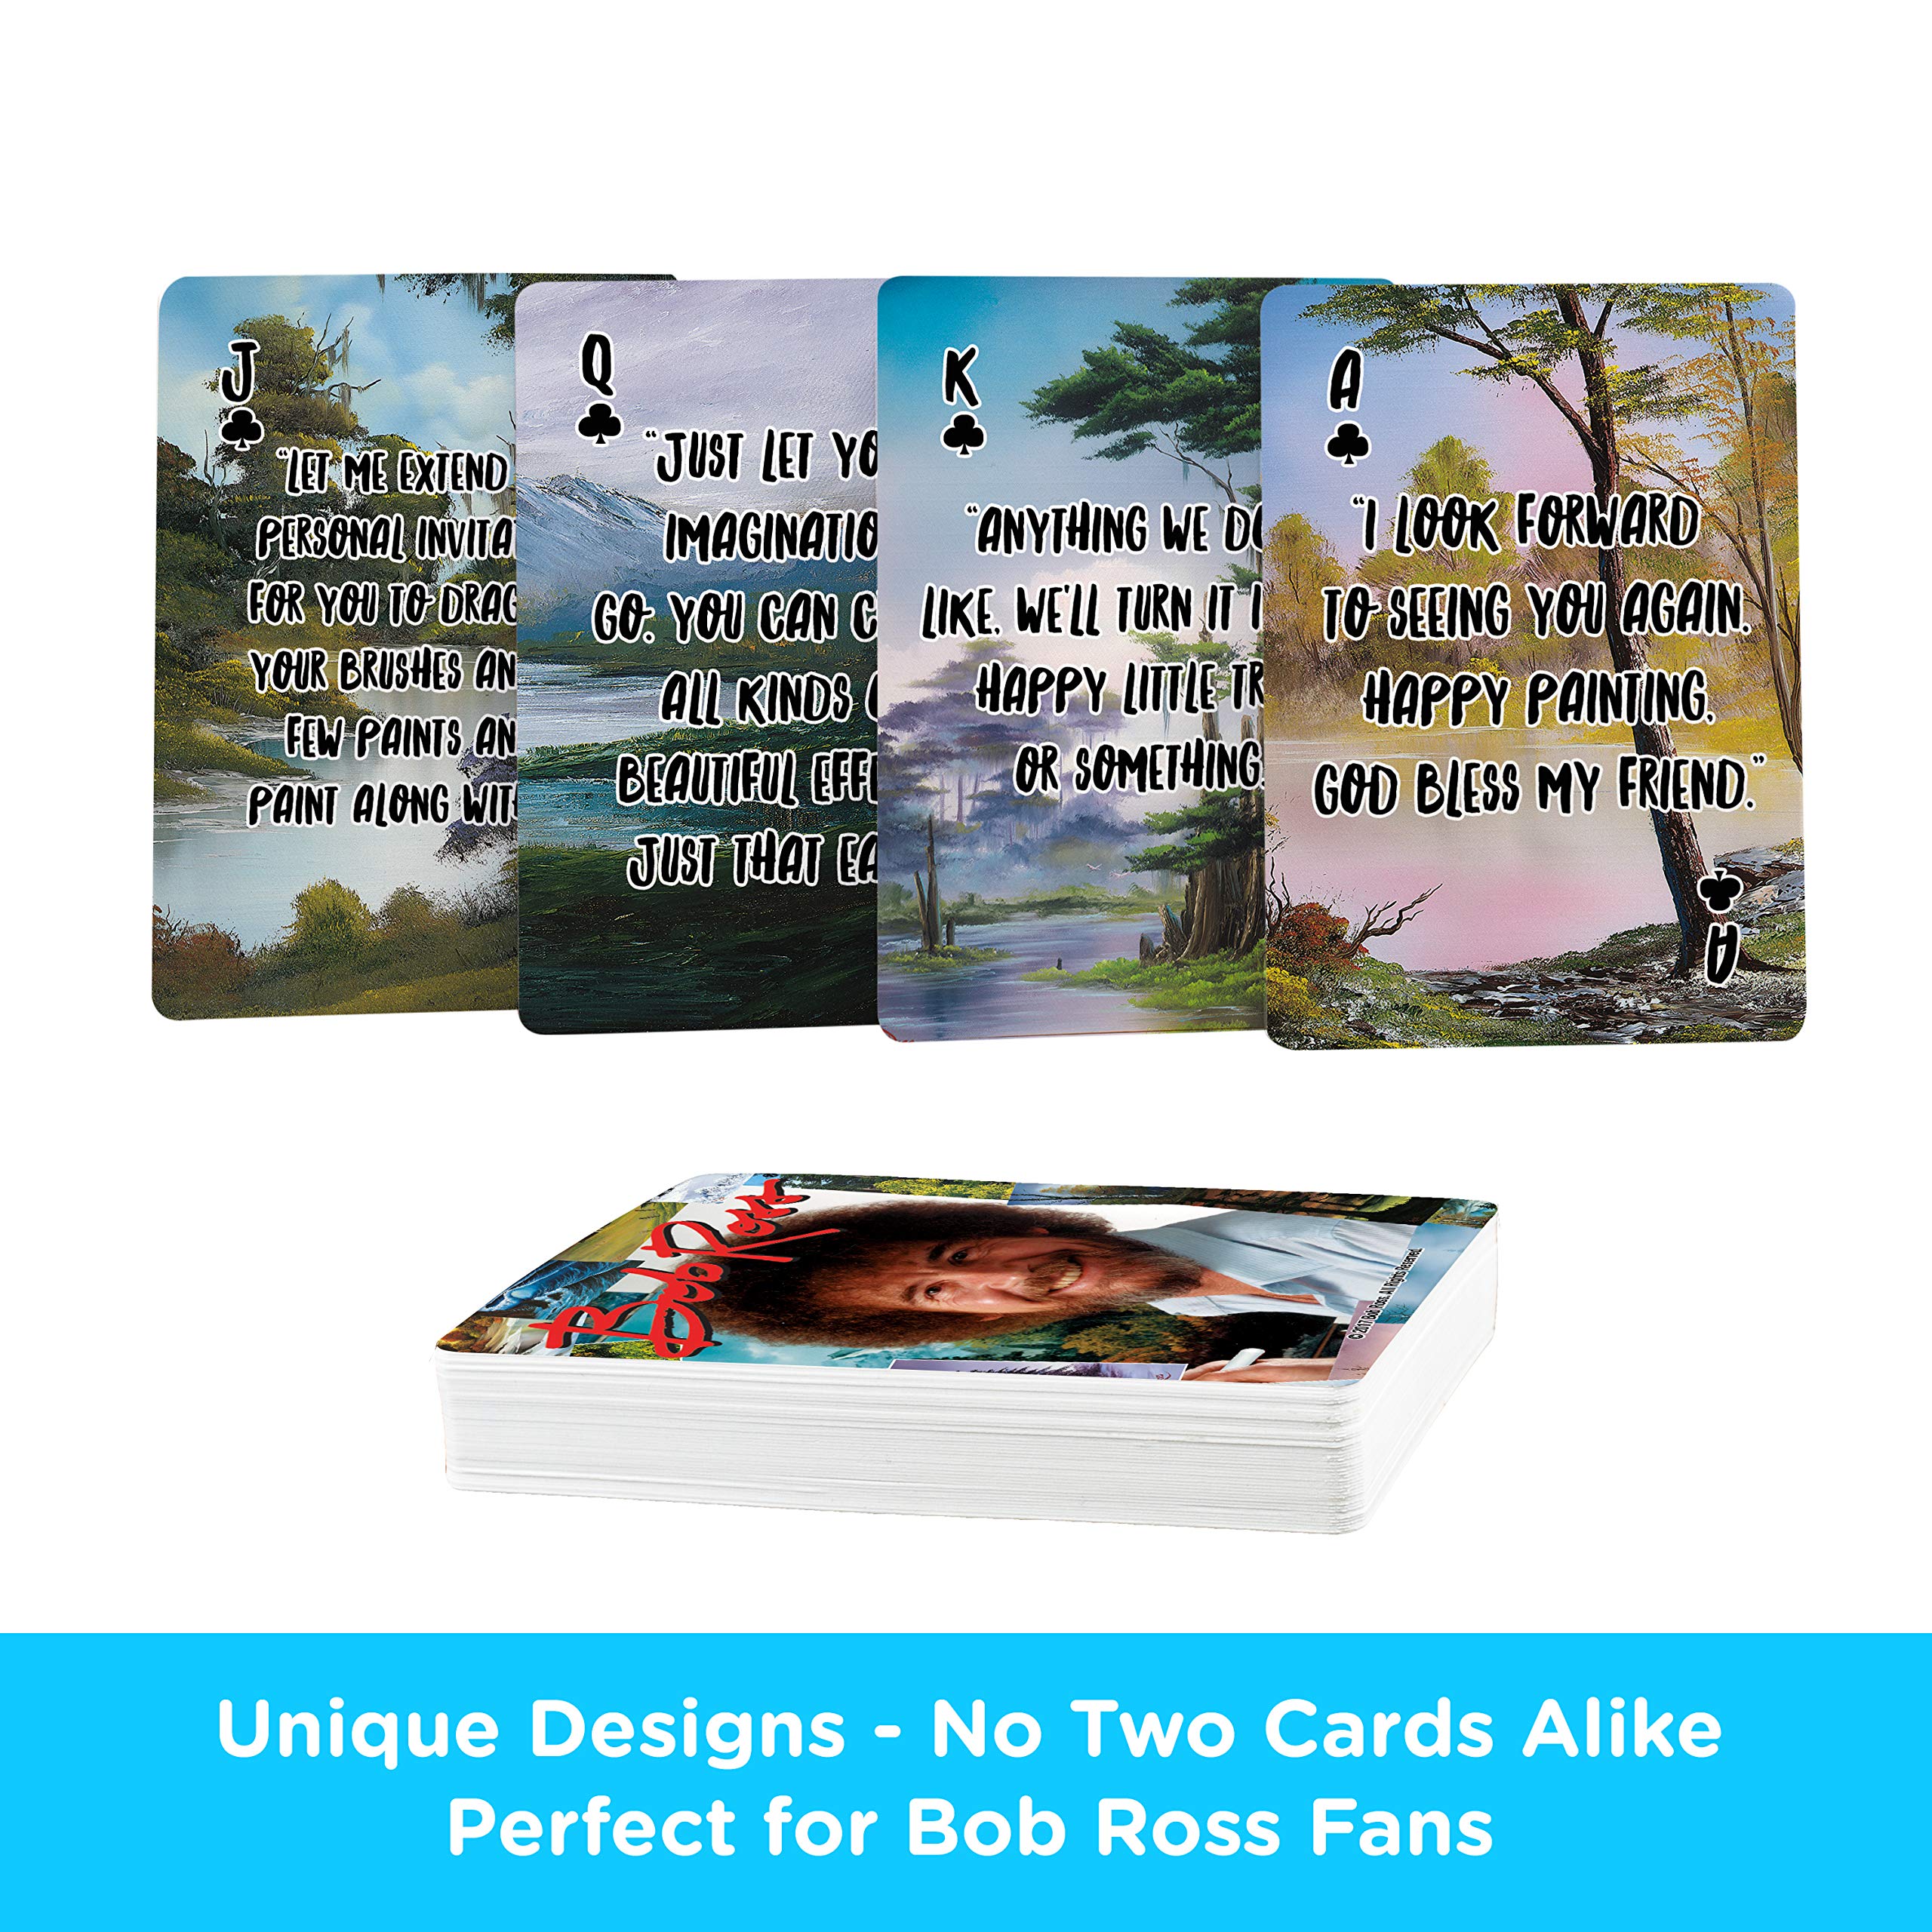 AQUARIUS Bob Ross Playing Cards - Bob Ross Quotes Deck of Cards for Your Favorite Card Games - Officially Licensed Bob Ross Merchandise & Collectibles